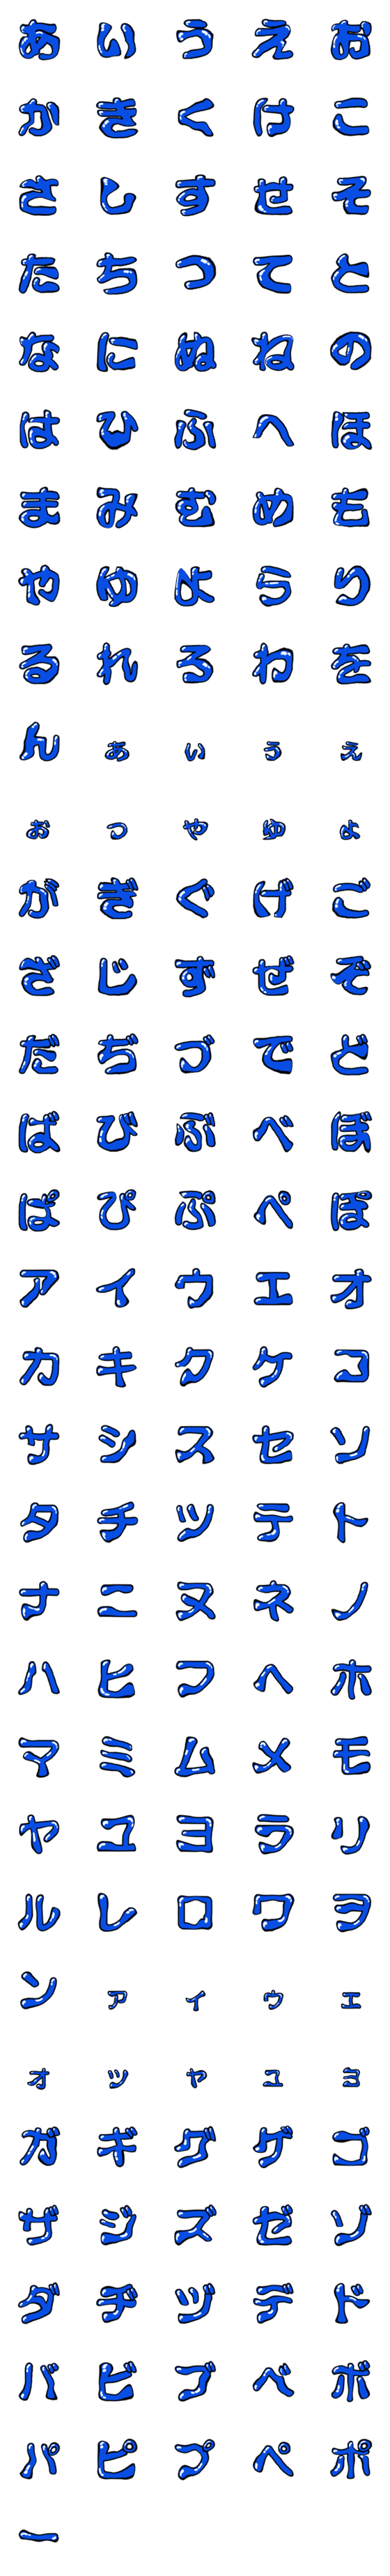 [LINE絵文字]可愛い♪ぷくぷく立体絵文字♪青色verの画像一覧